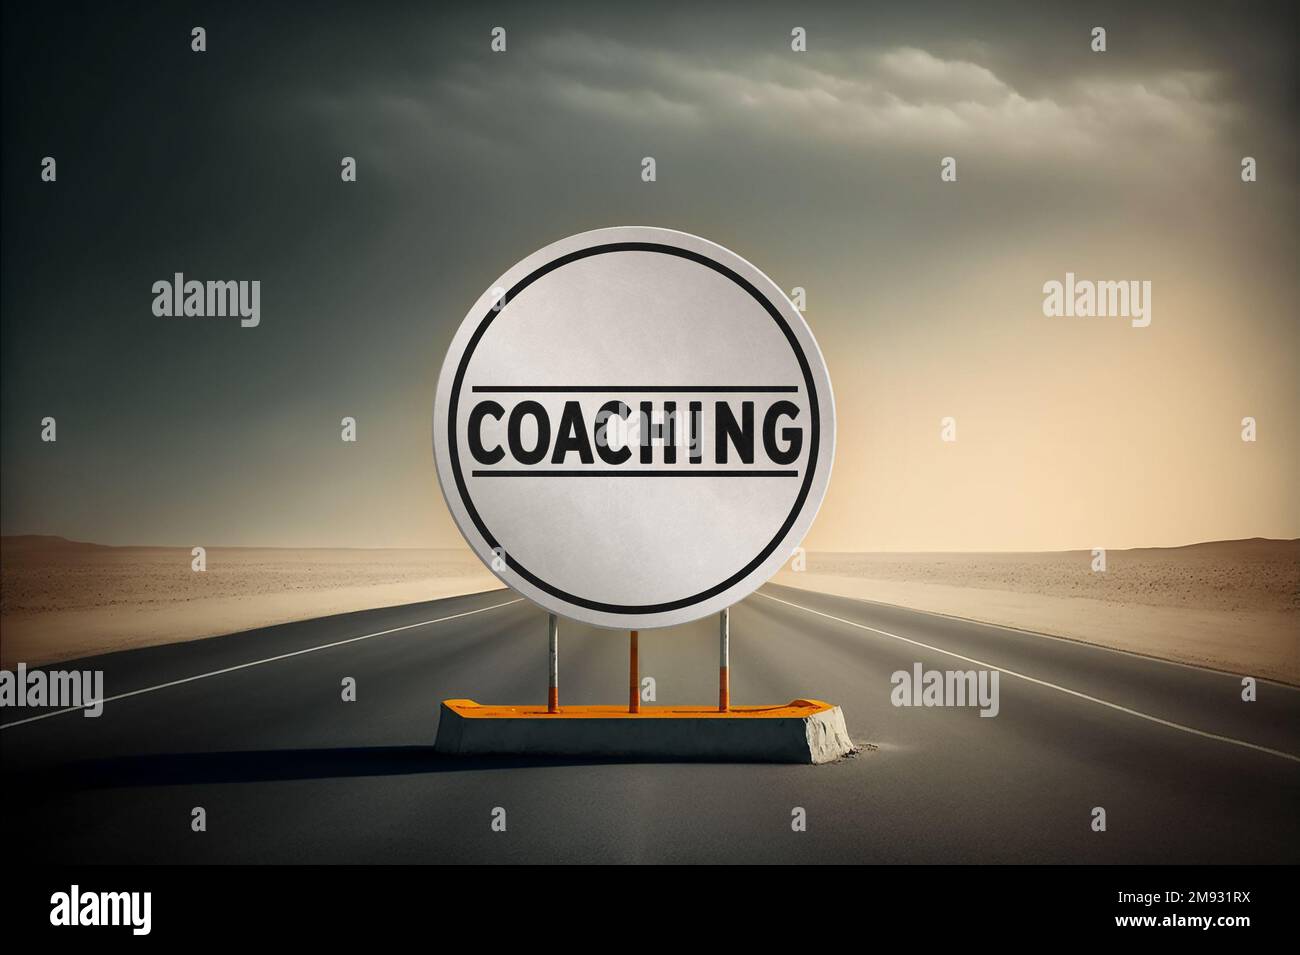 Coaching - Road sign message Stock Photo